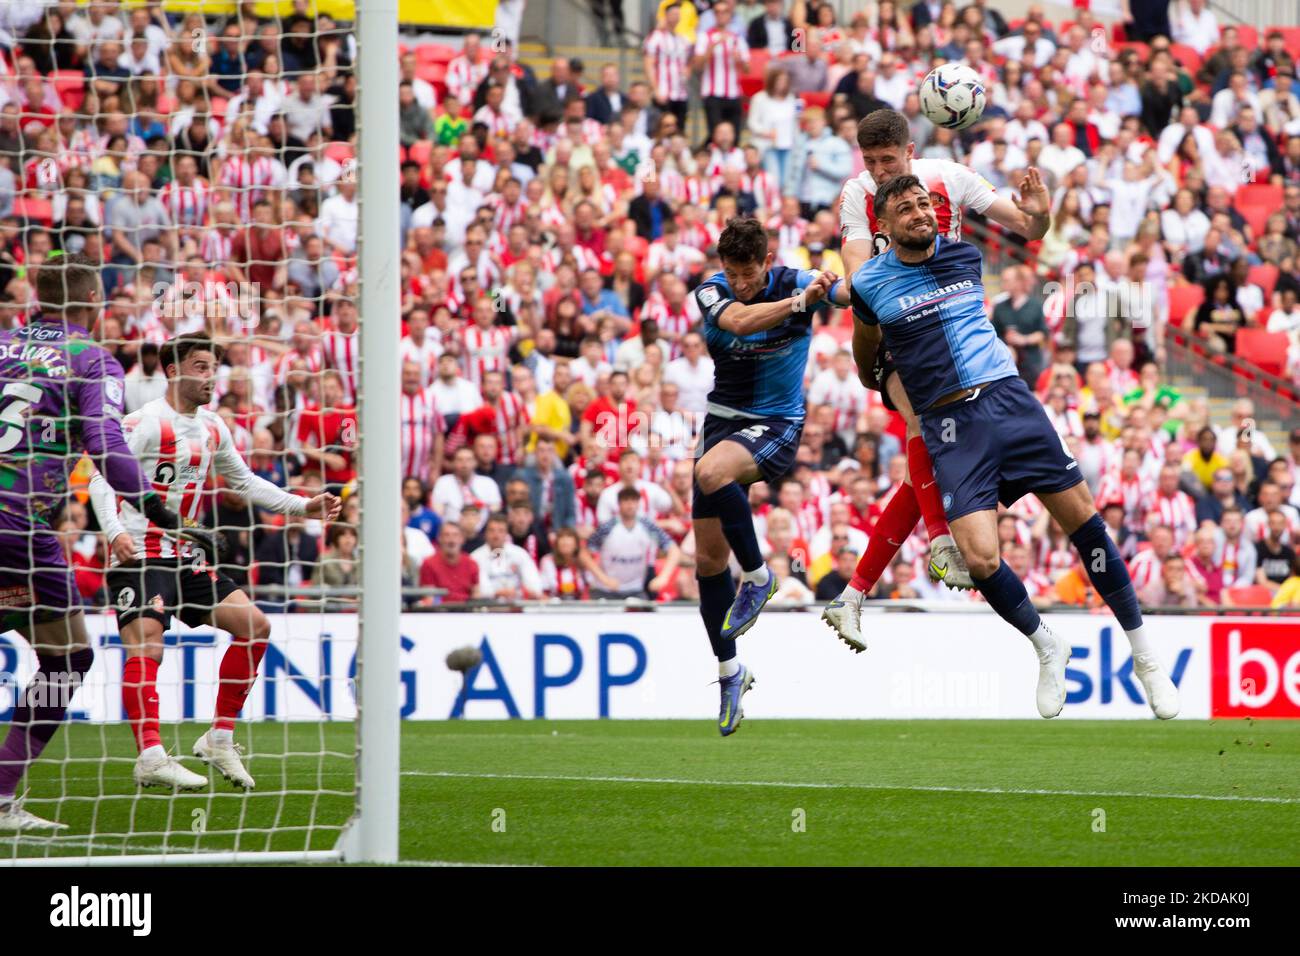 Ross Stewart of Sunderland and Ryan Tafazolli of Wycombe Wanderers Wanderers battle for the ball during the Sky Bet League 1 match between Sunderland and Wycombe Wanderers at Wembley Stadium, London on Saturday 21st May 2022. (Photo by Federico Maranesi/MI News/NurPhoto) Stock Photo